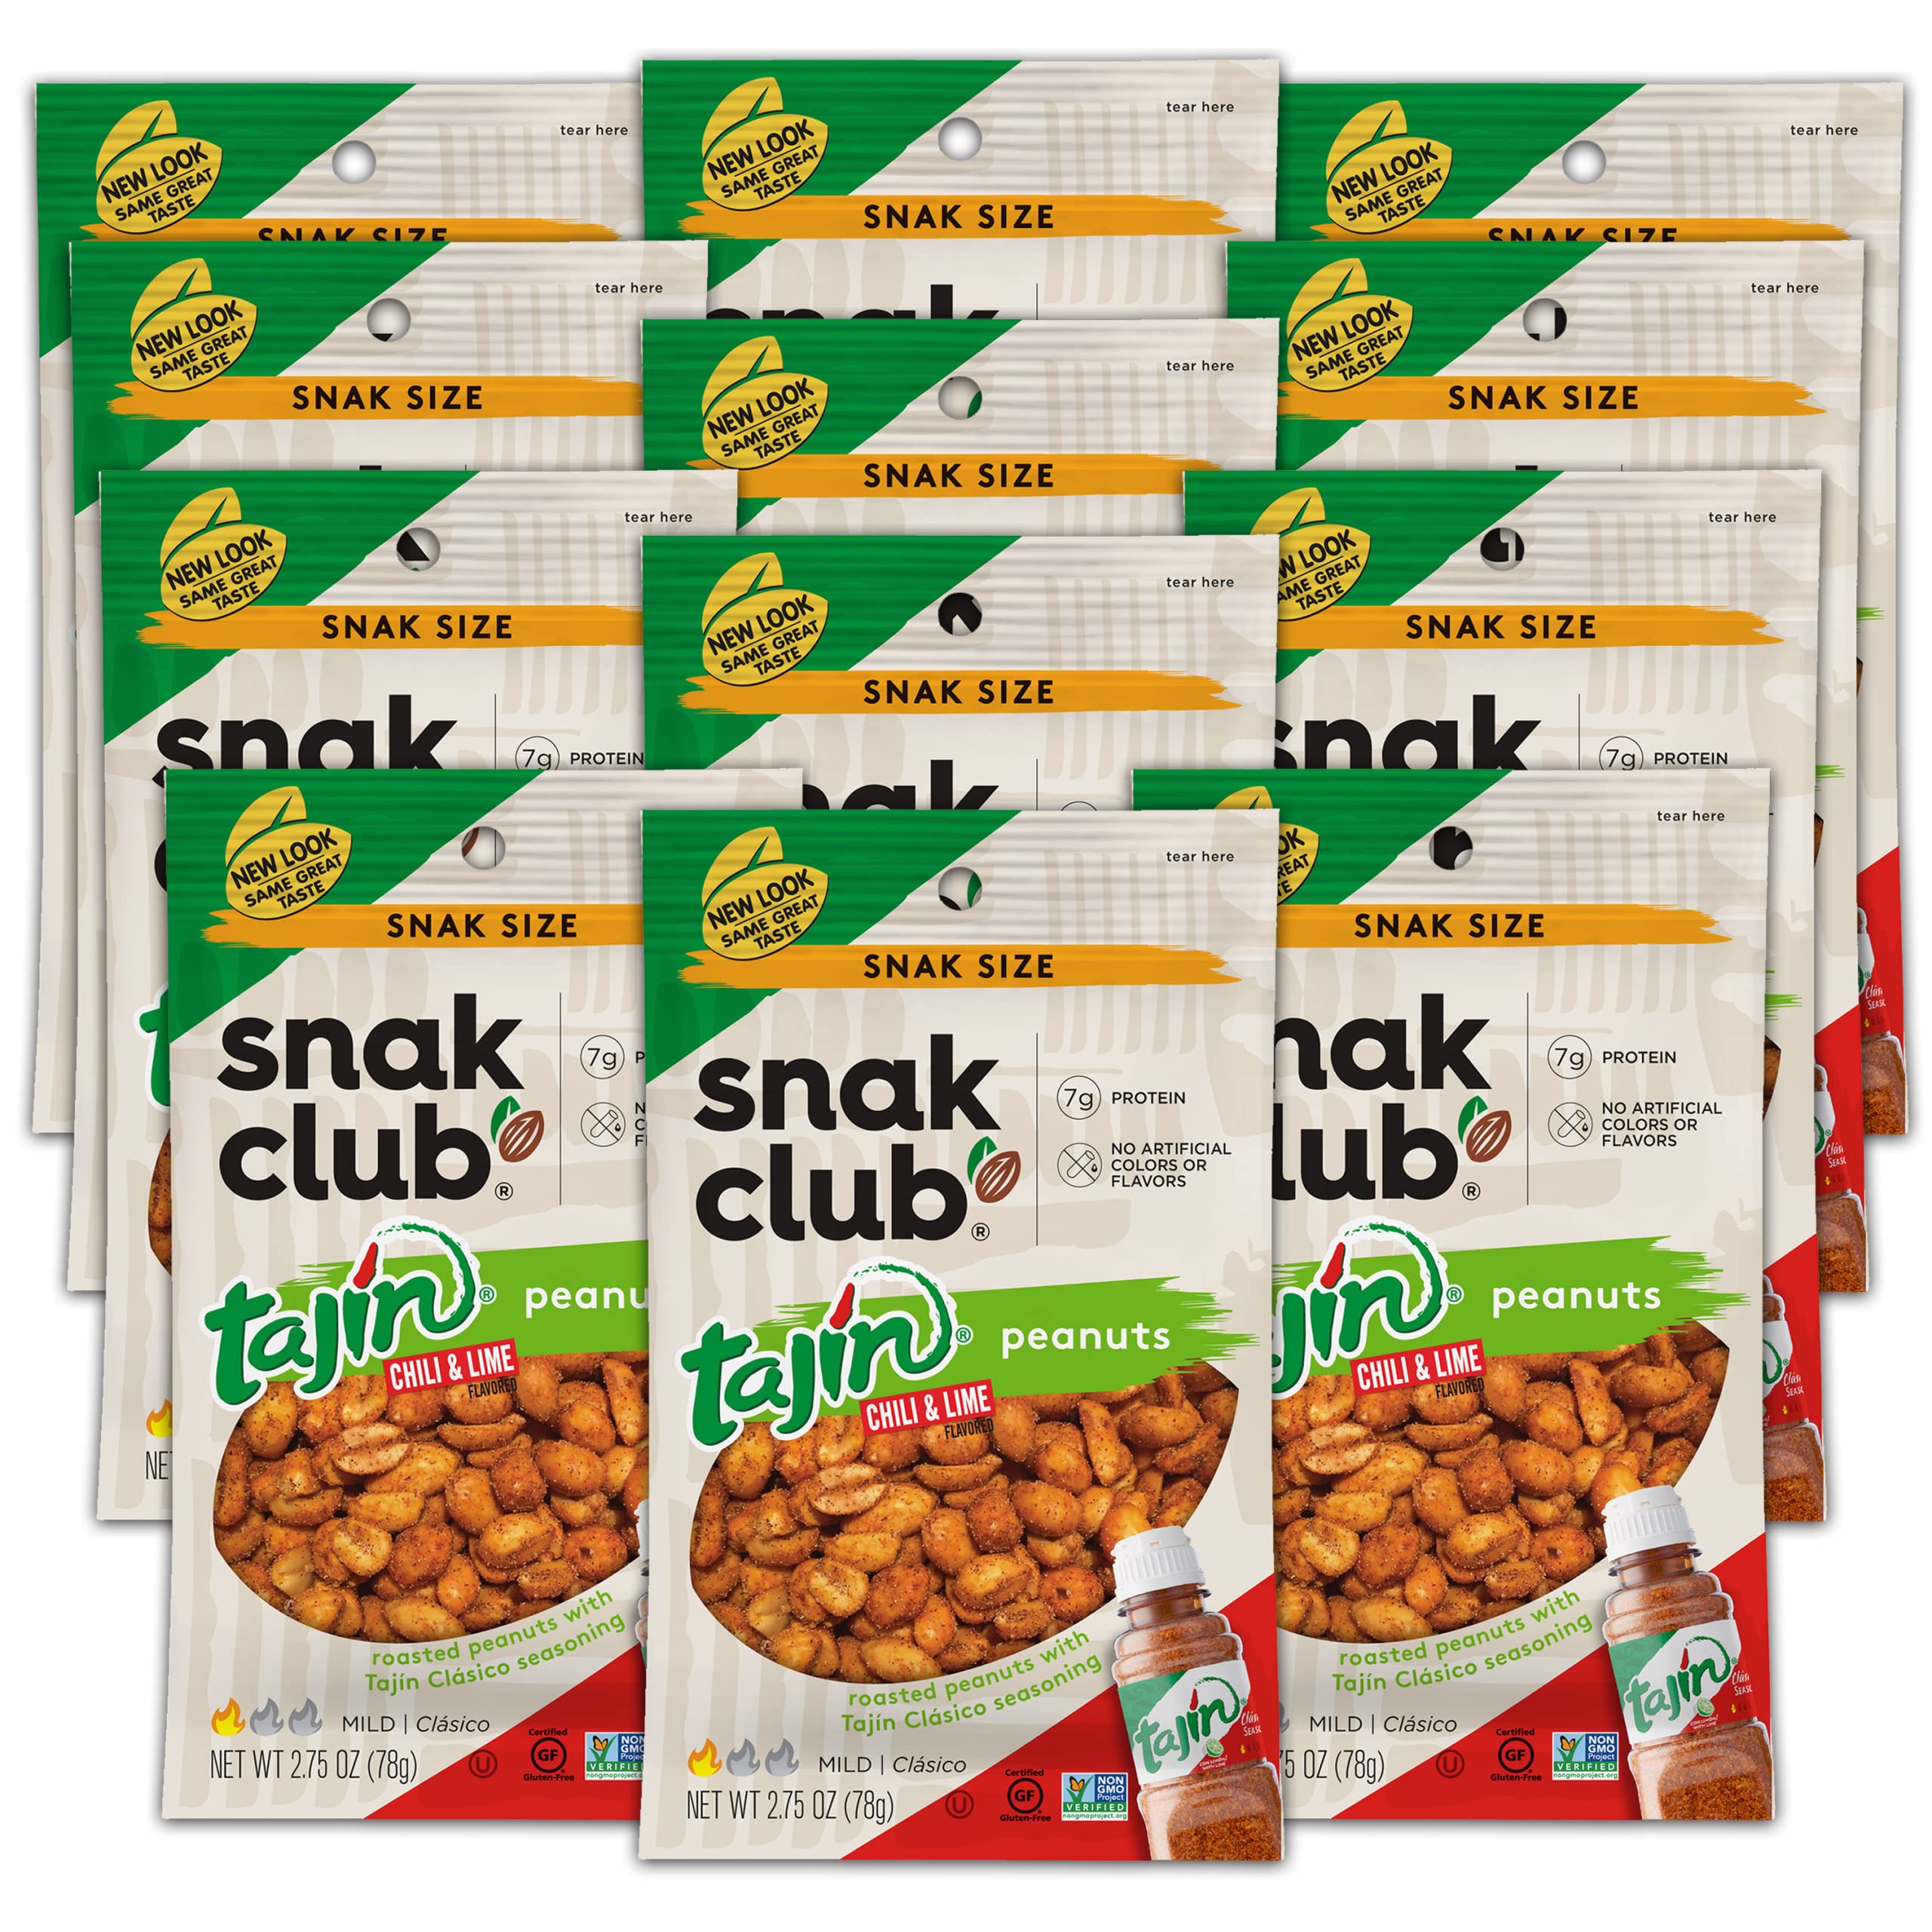 Snak Club Tajin Peanuts, Chili & Lime Mild in Heat Bold in Favor Spicy  Snacks,  Ounce Grab 'n Go Snack Size (Pack of 12)  Ounce (Pack of  12)